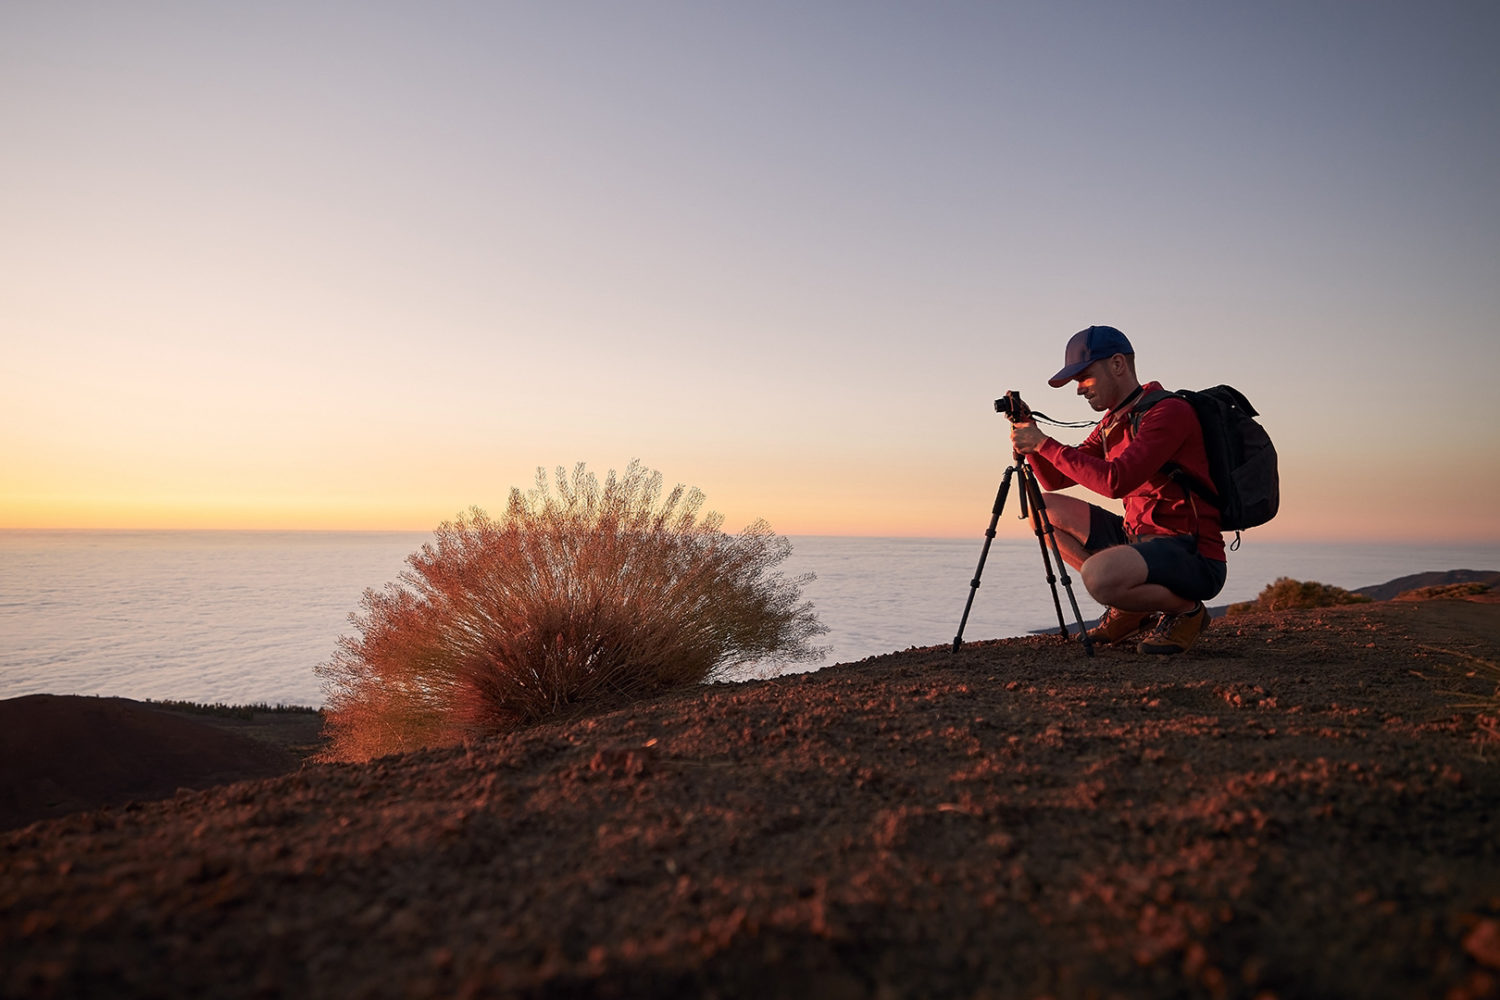 10 tips for making time for photography when you have a day job